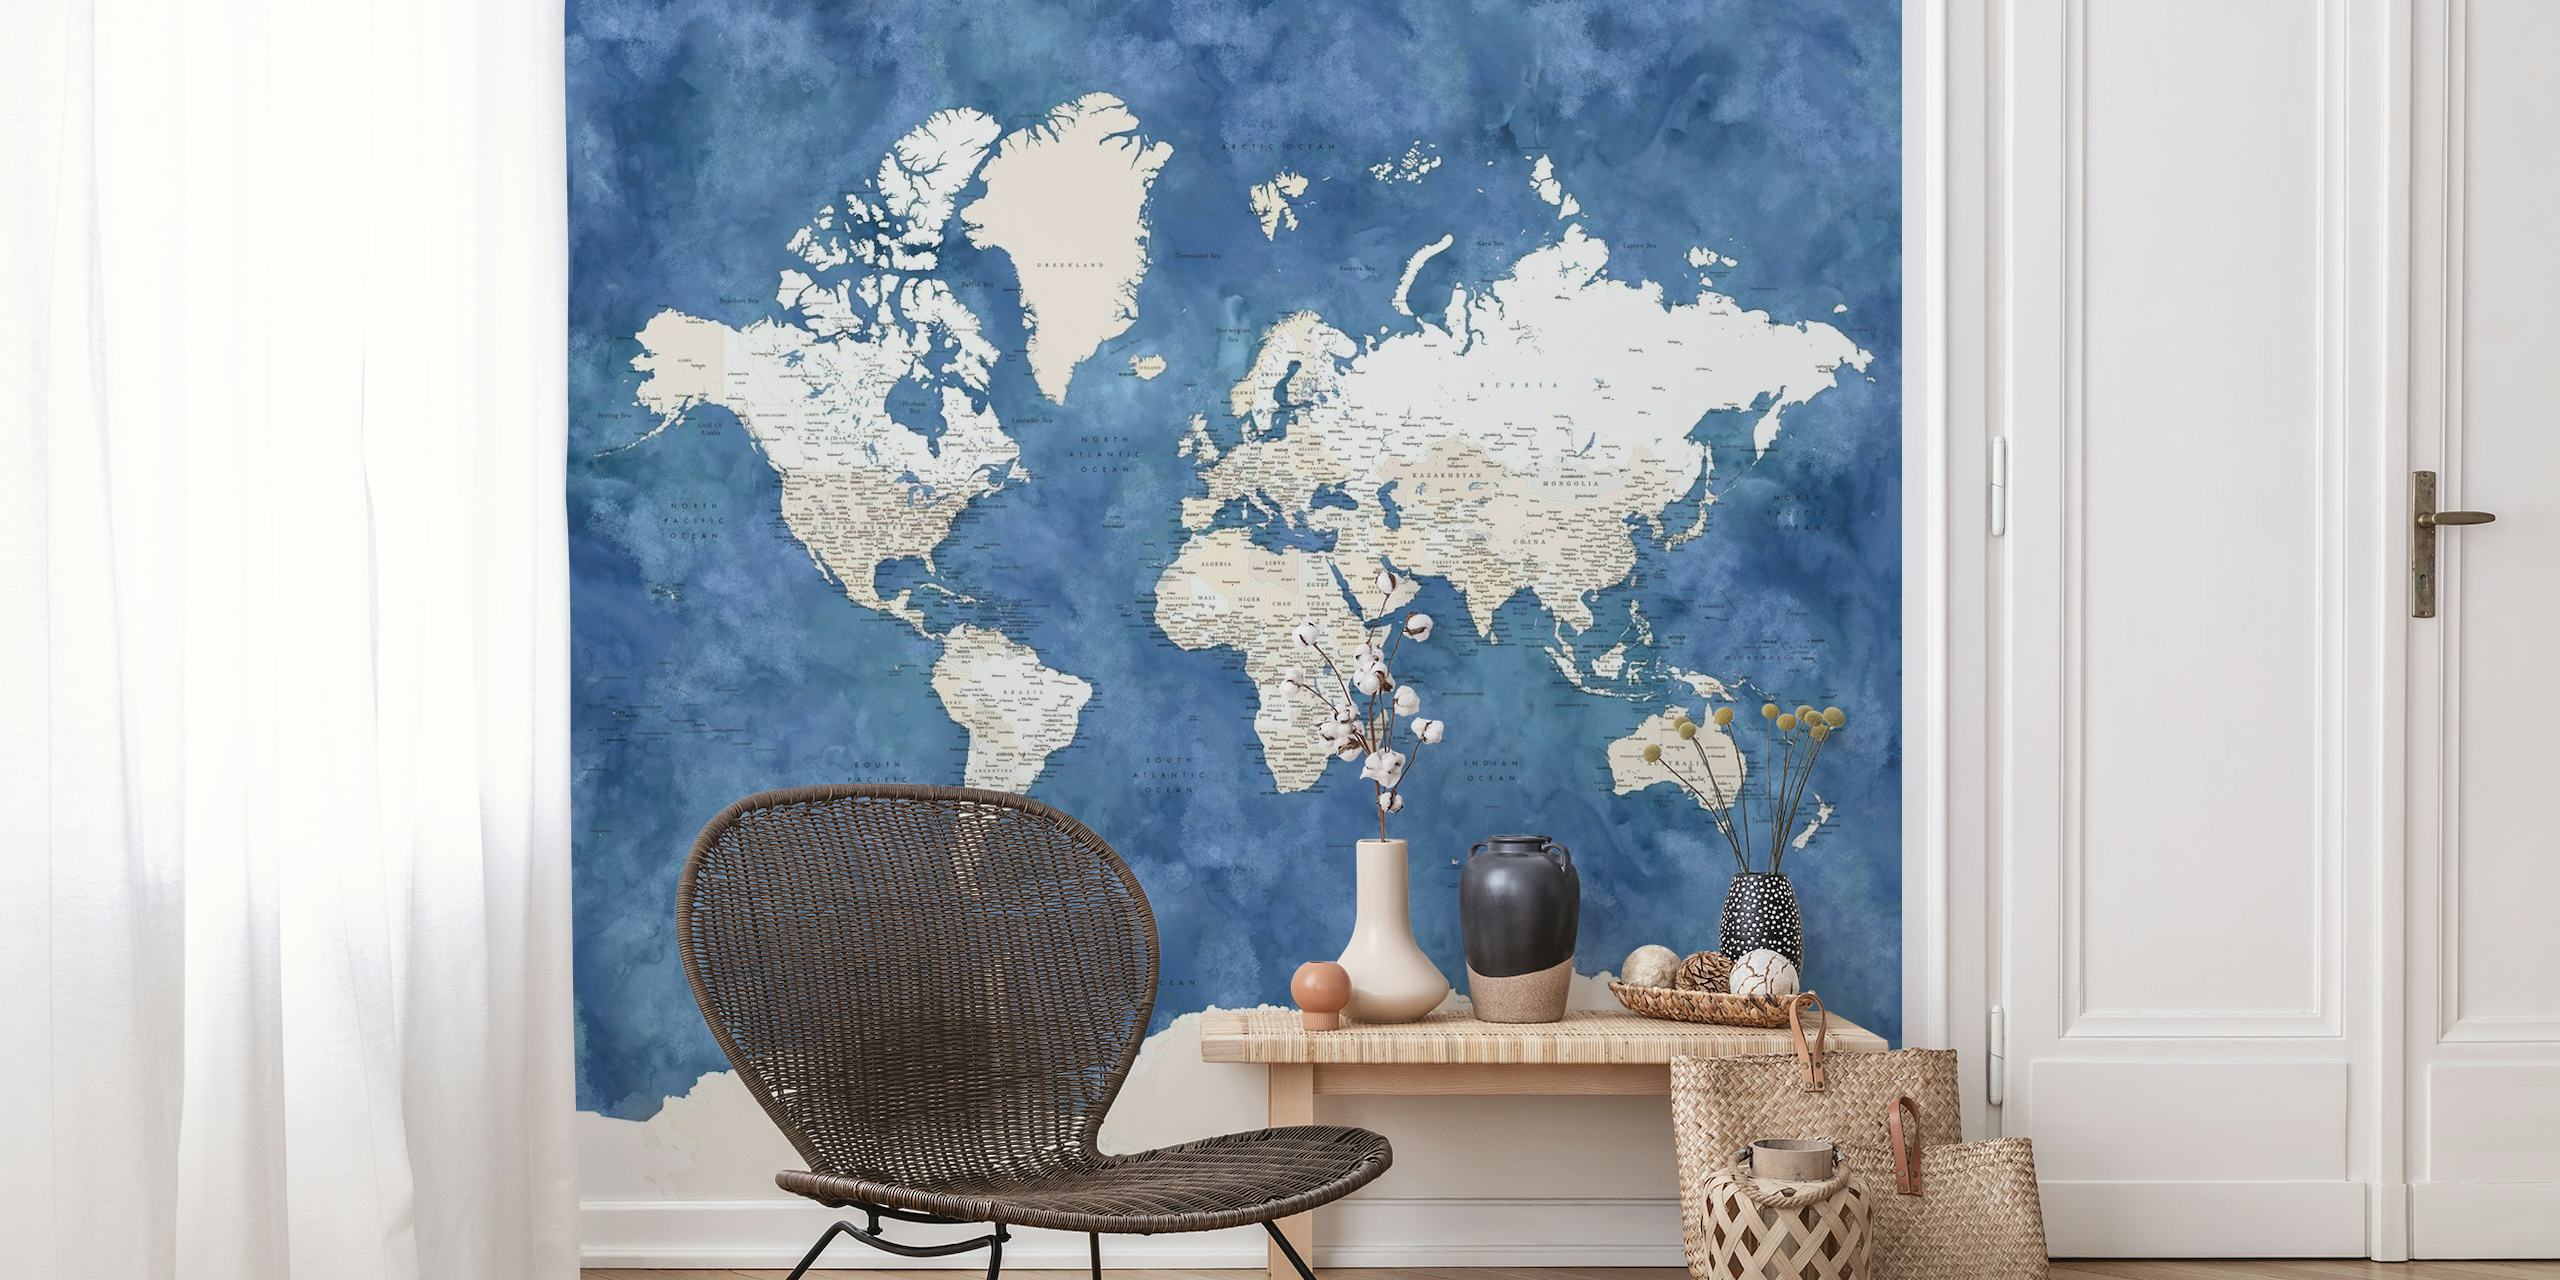 Antarctica-centered world map wall mural in shades of white and blue